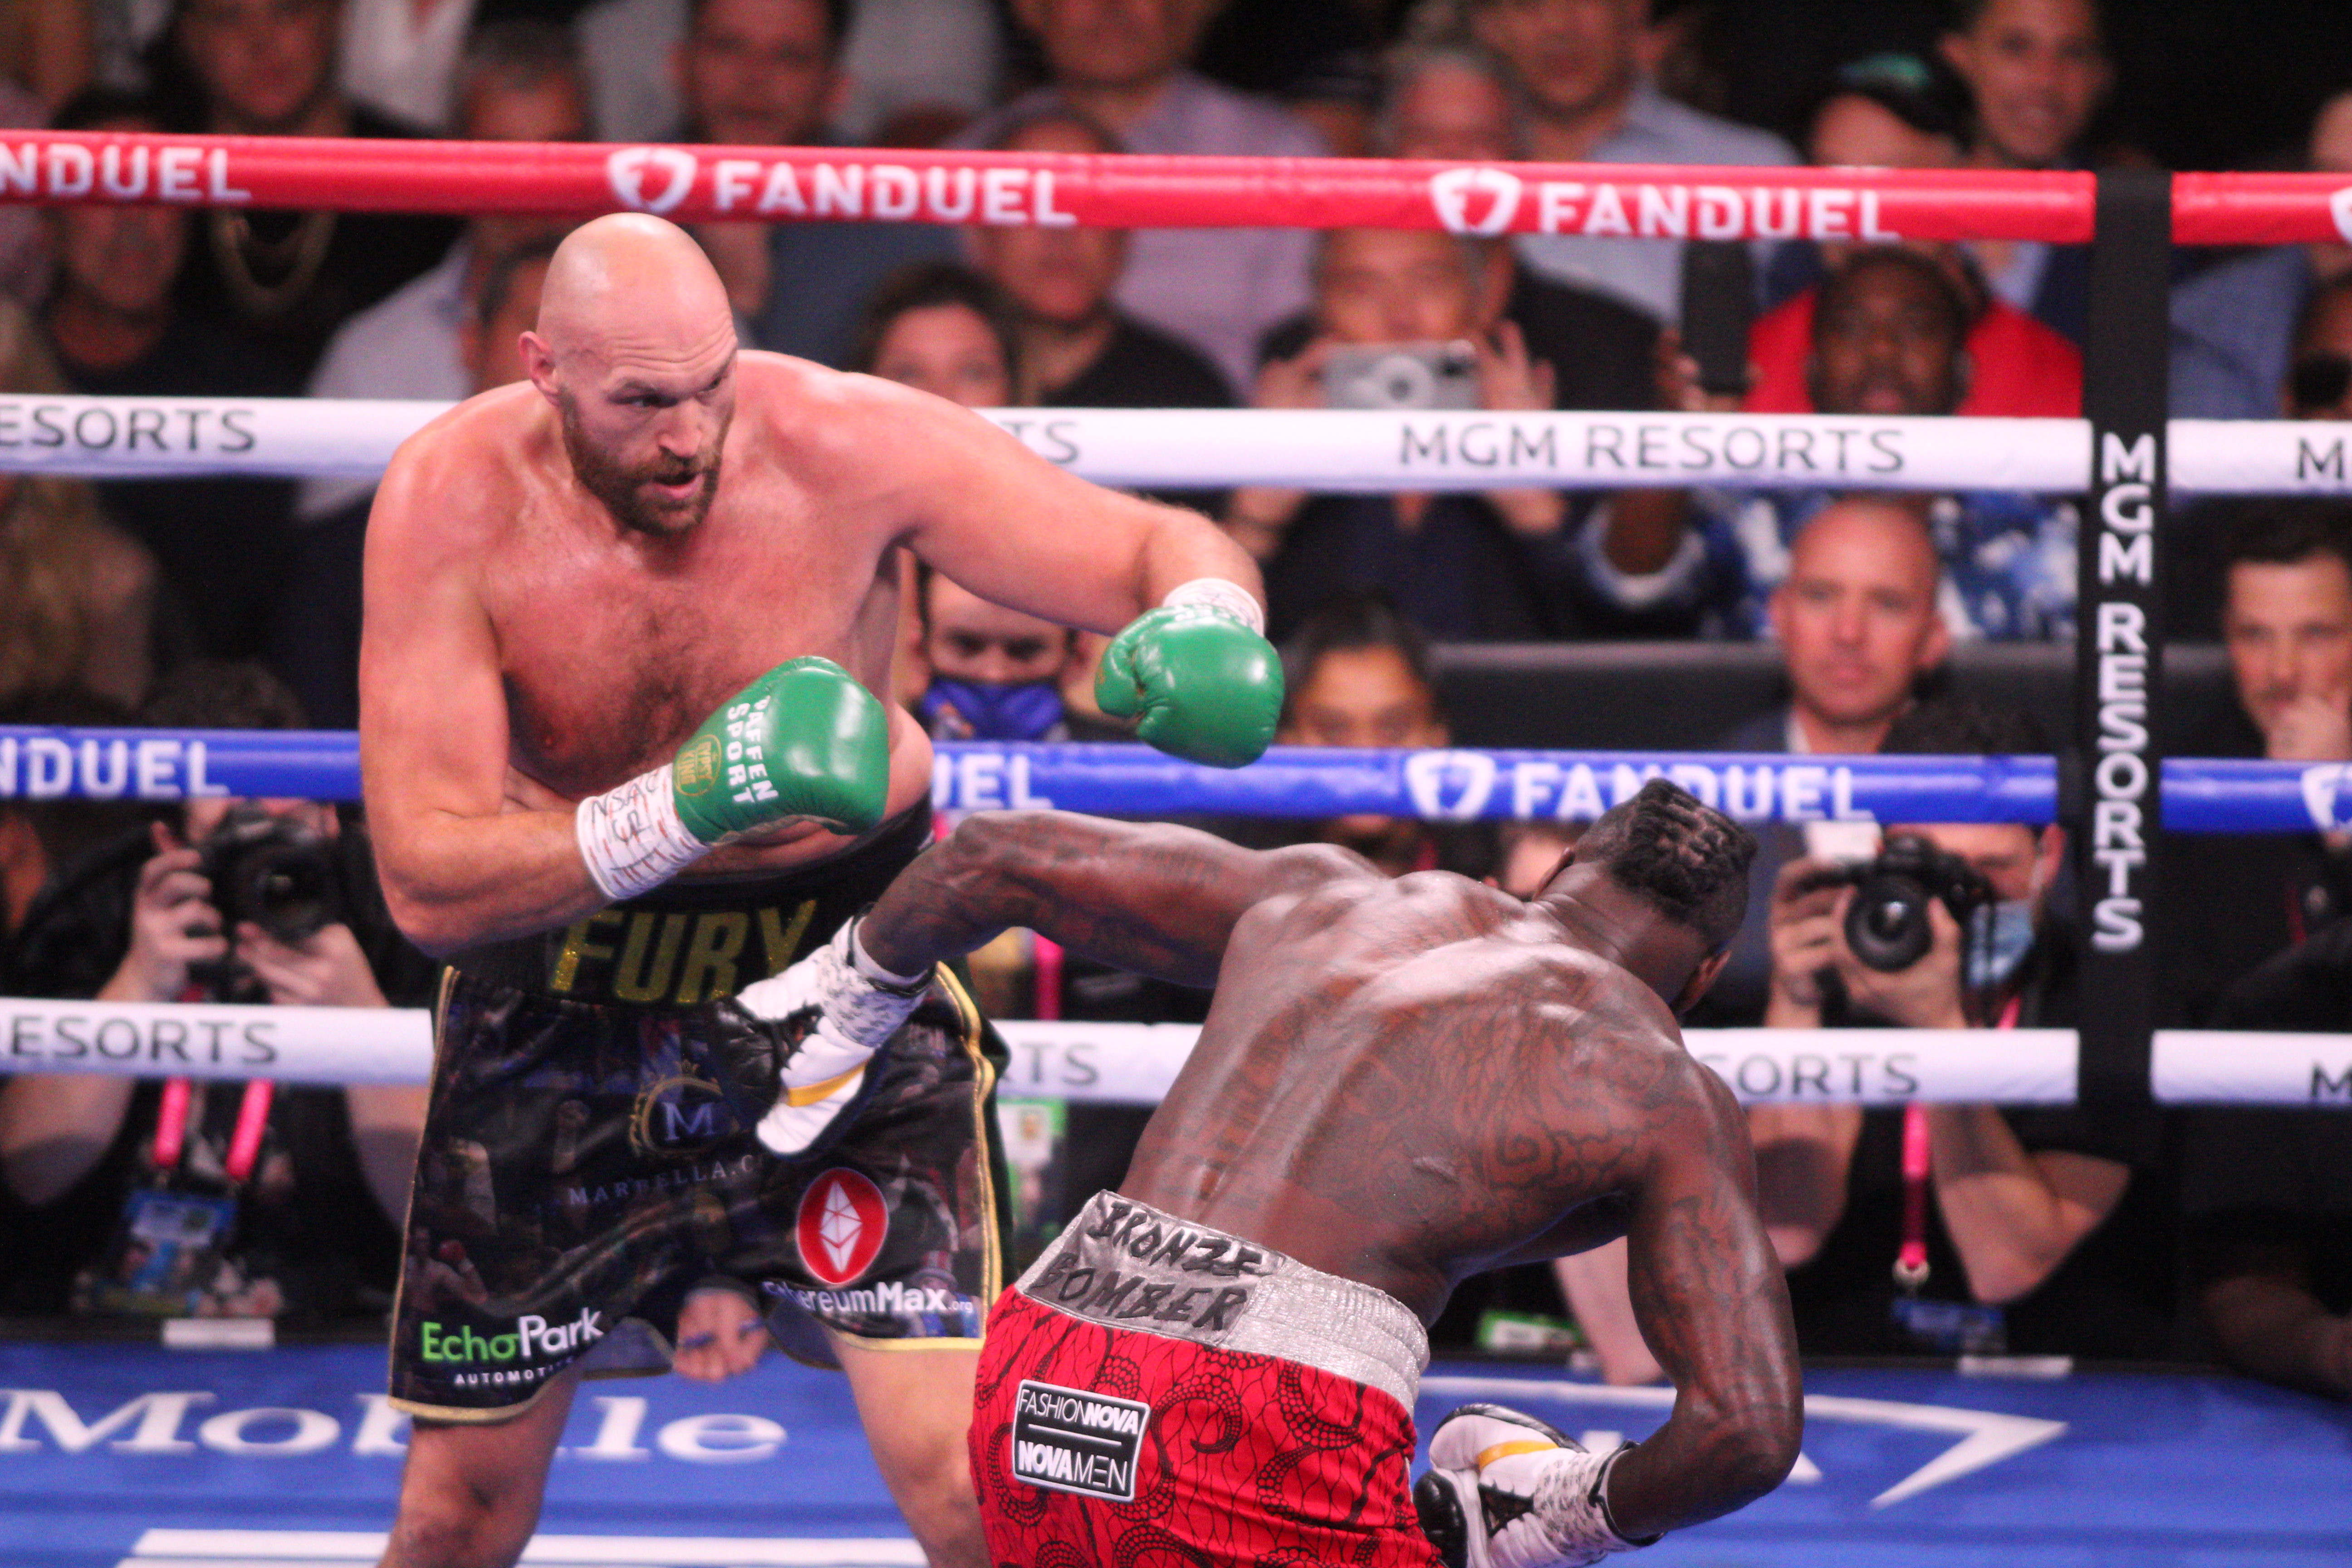 Tyson Fury says Deontay Wilder refused to show sportsmanship after KO